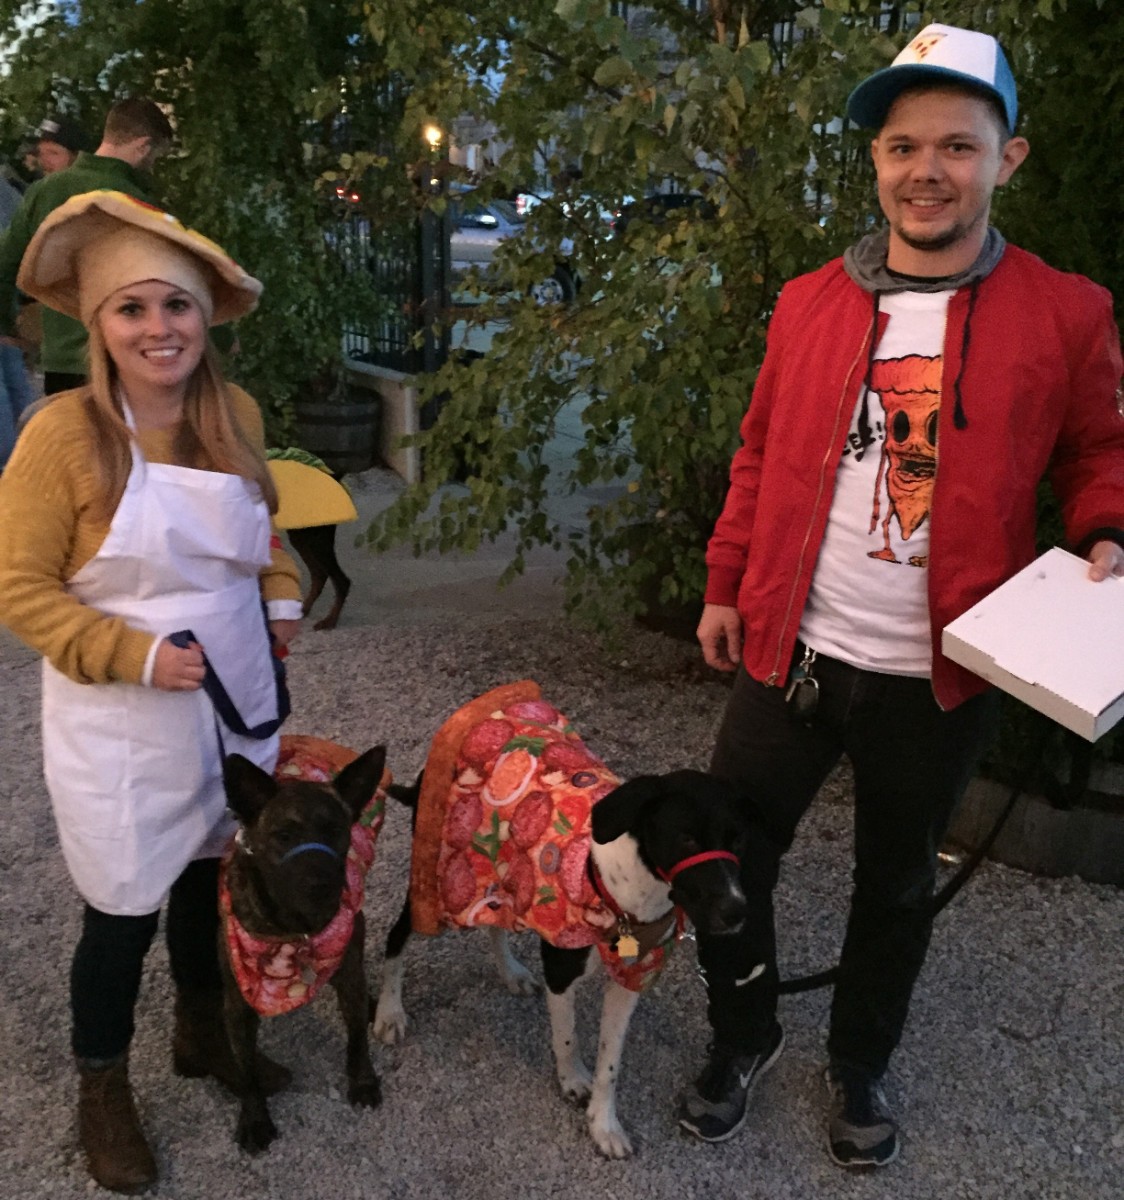 Katie and John with their dogs Sasha and Mac dressed up as a pizza delivery operation.